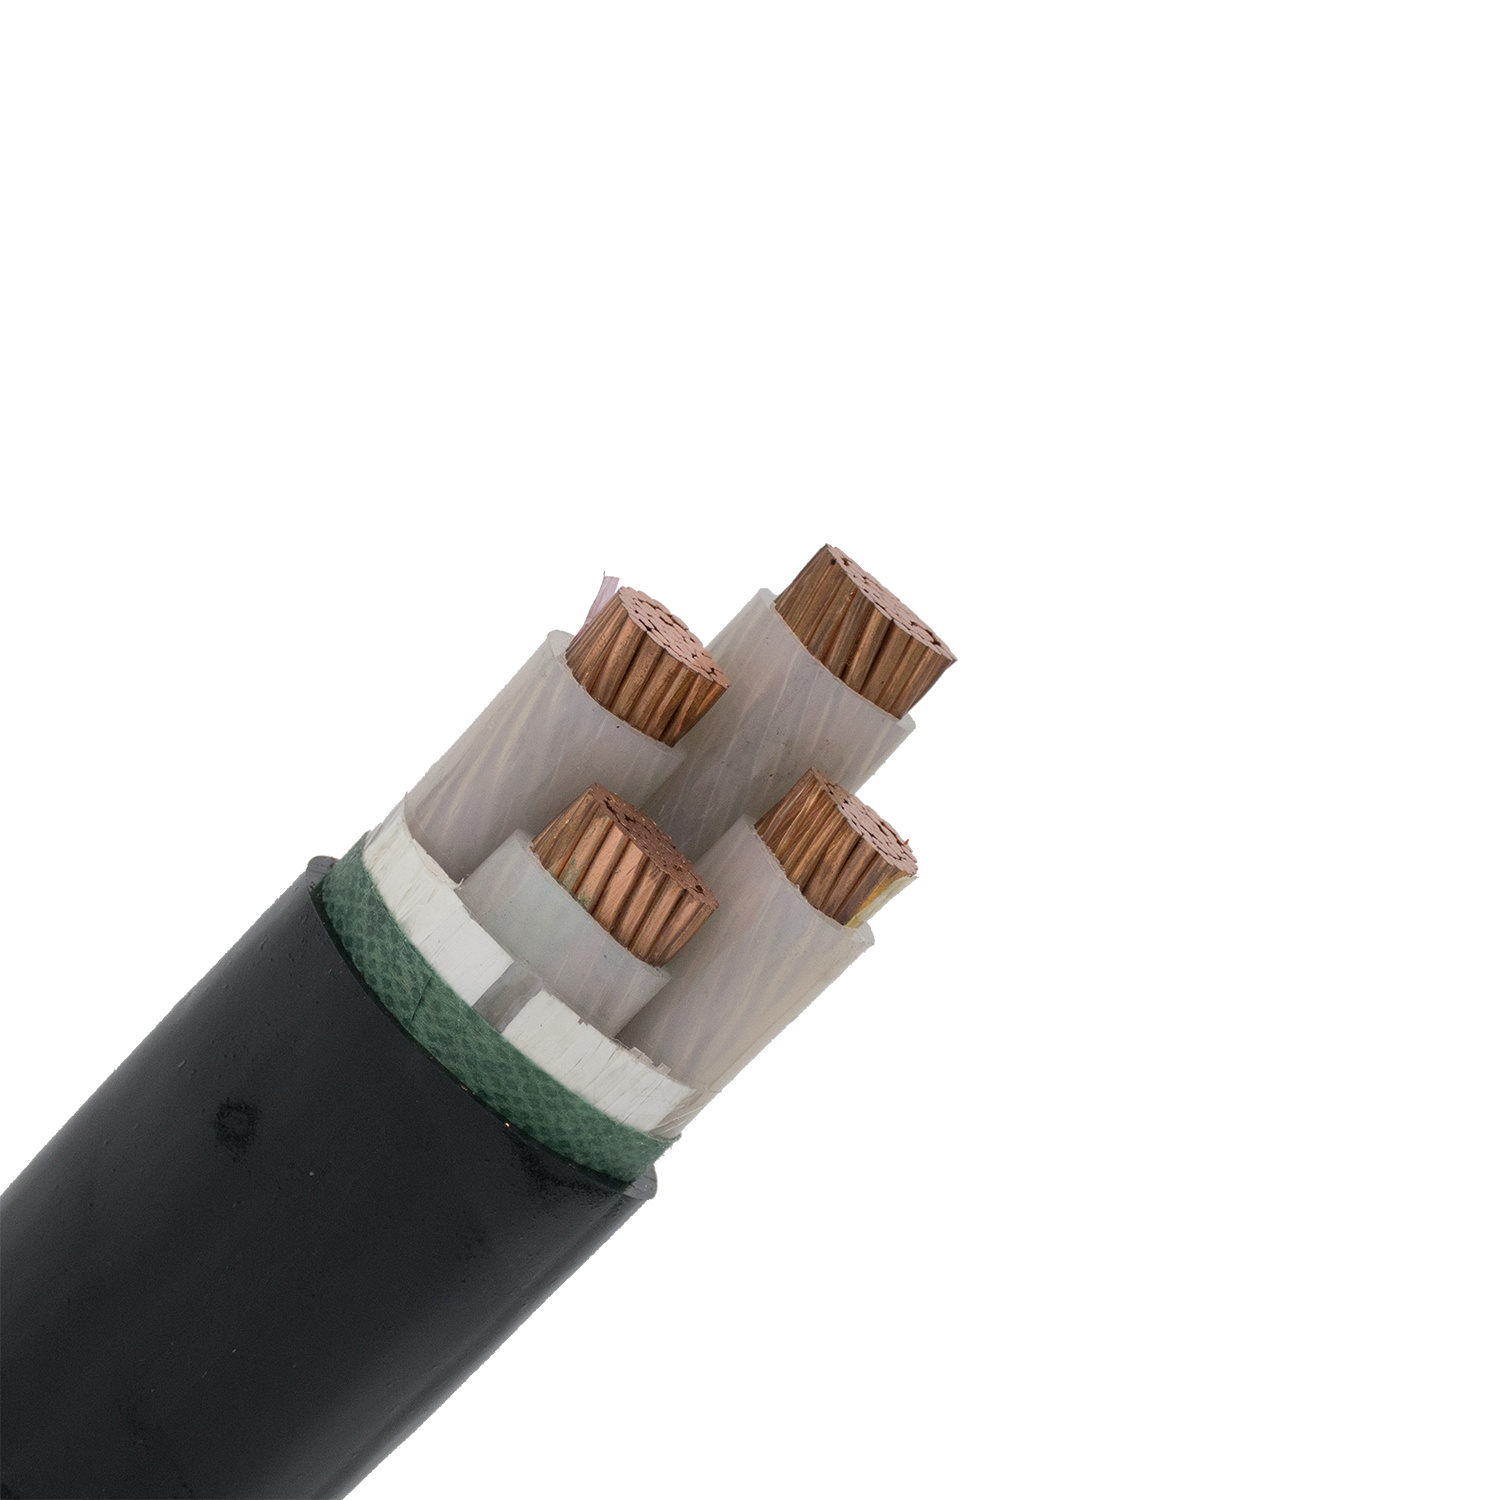 Medium Voltage Cable 3*240mm2 Swa as Per IEC60502 with Wooden Drums